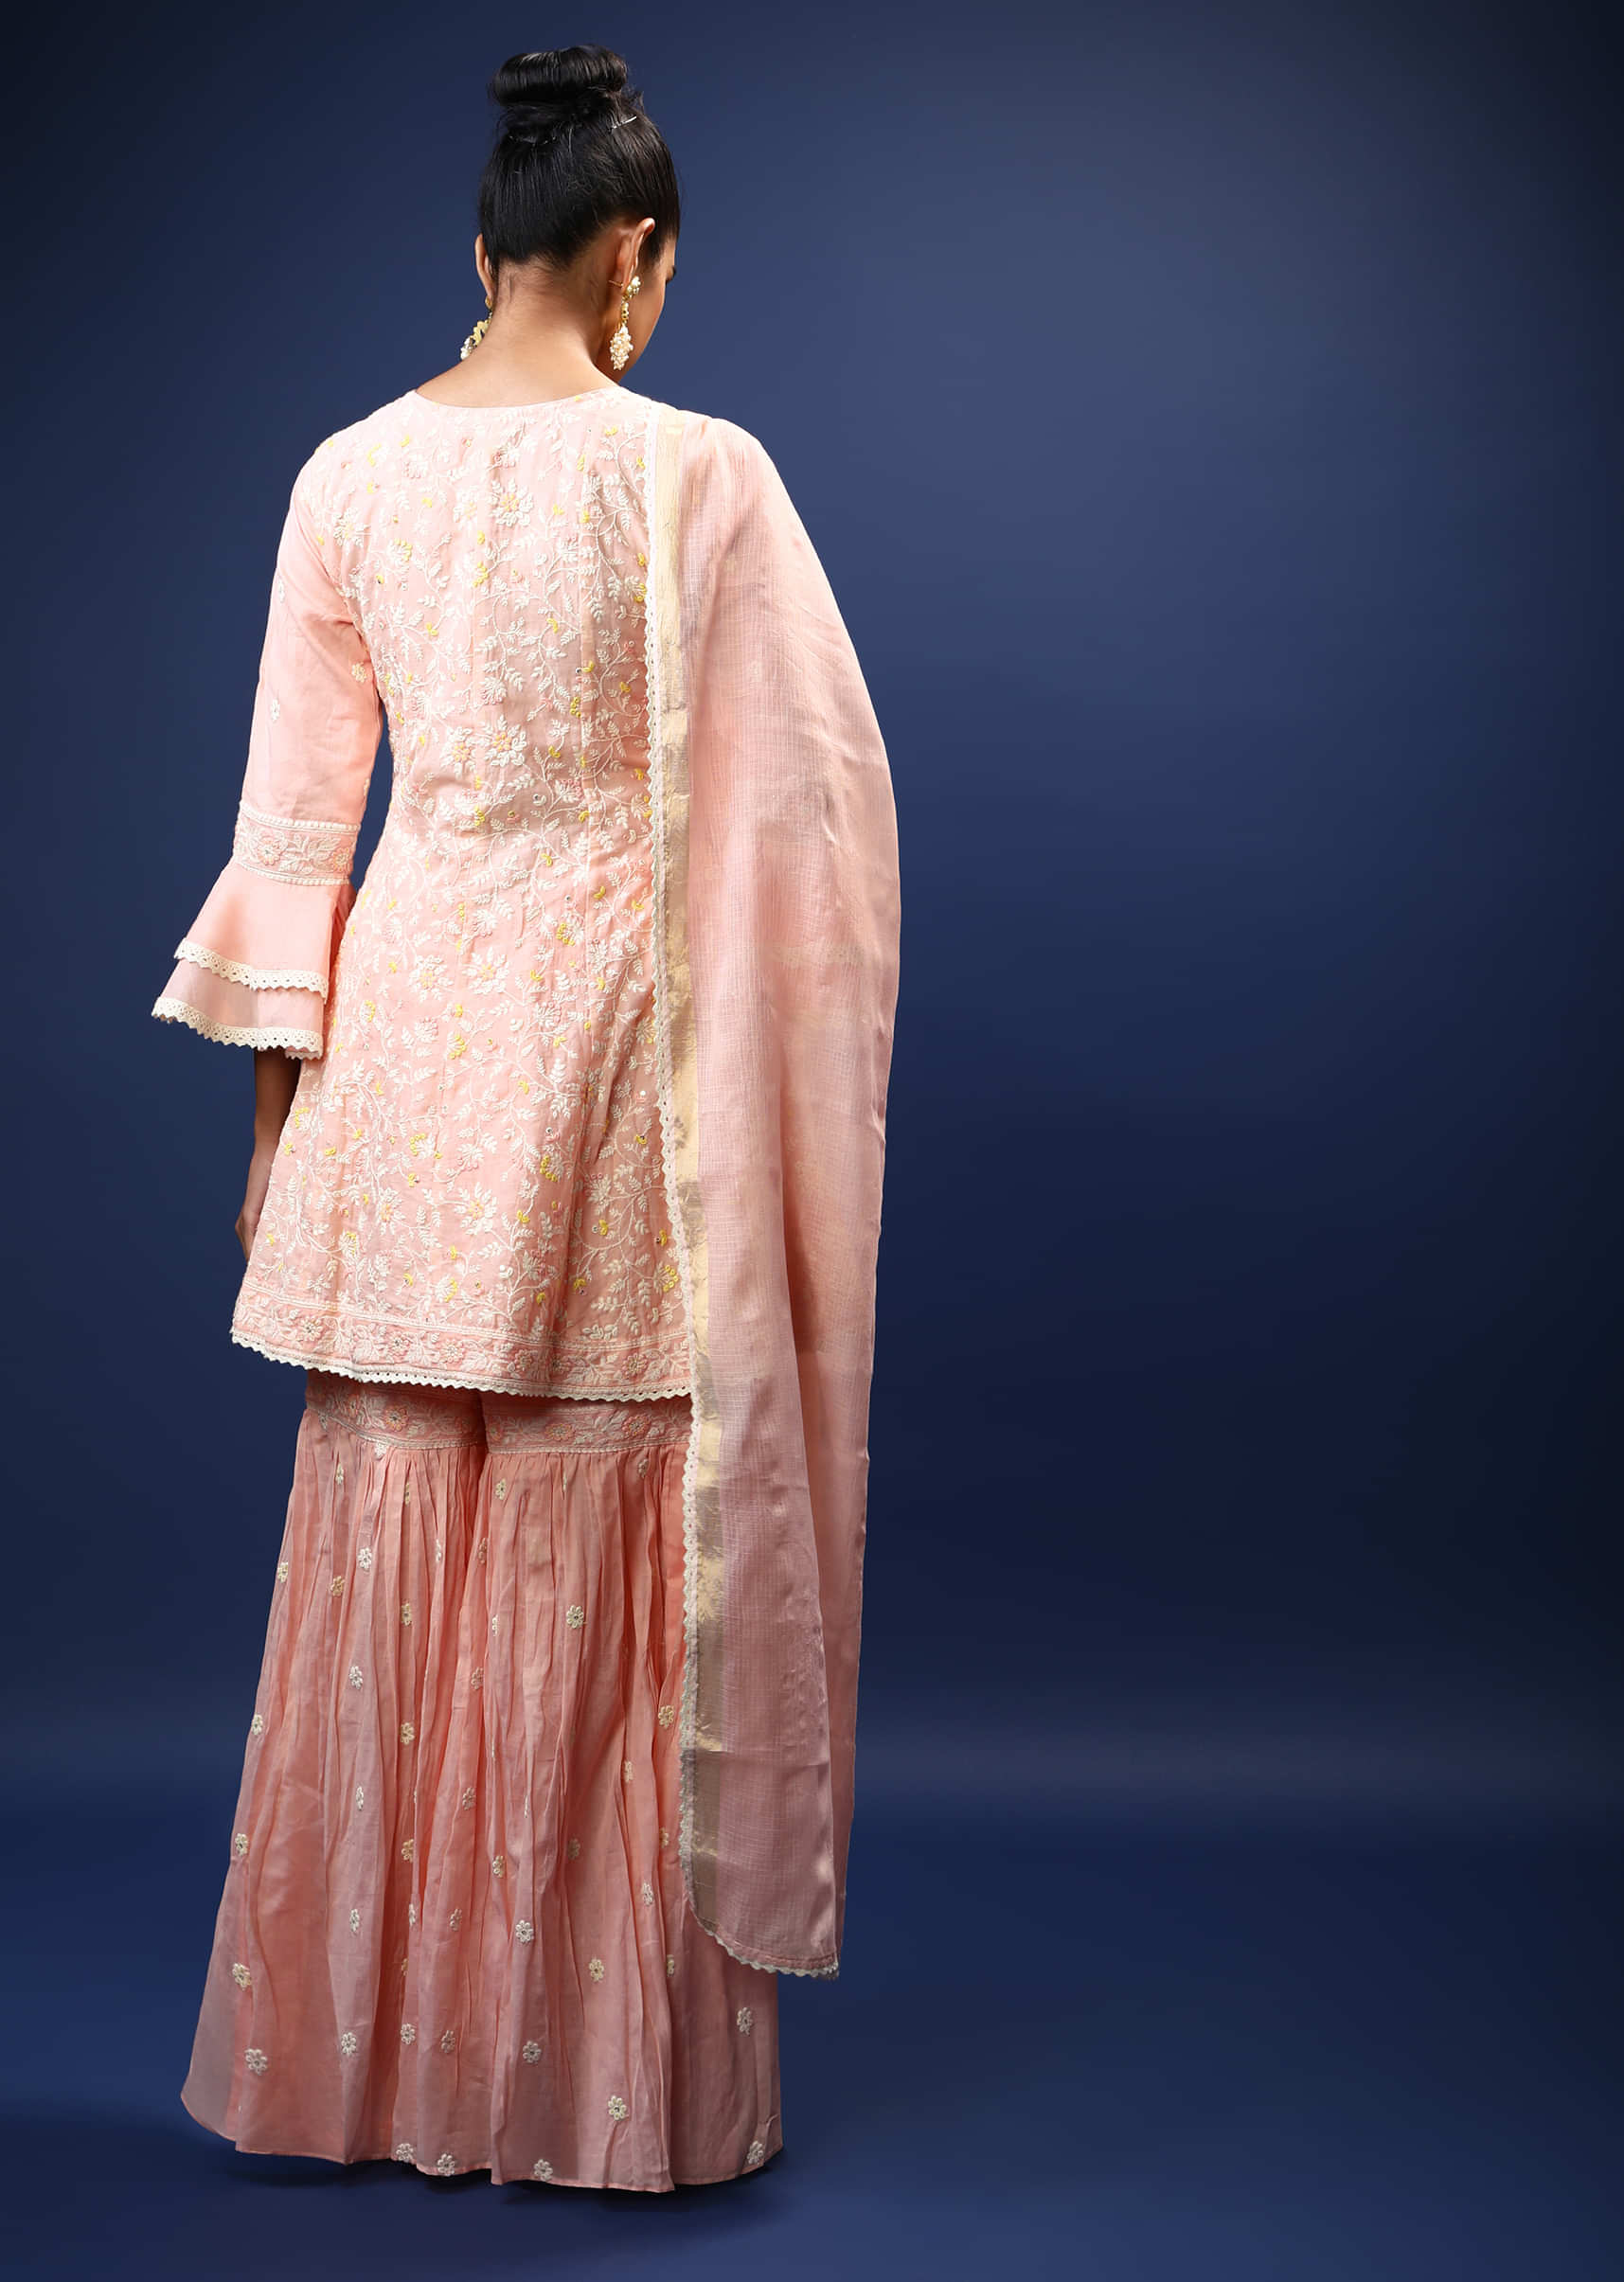 Baby Pink Sharara Peplum Suit In Cotton With Pastel And White Thread Embroidered Floral Motifs And Ruffle Sleeves  